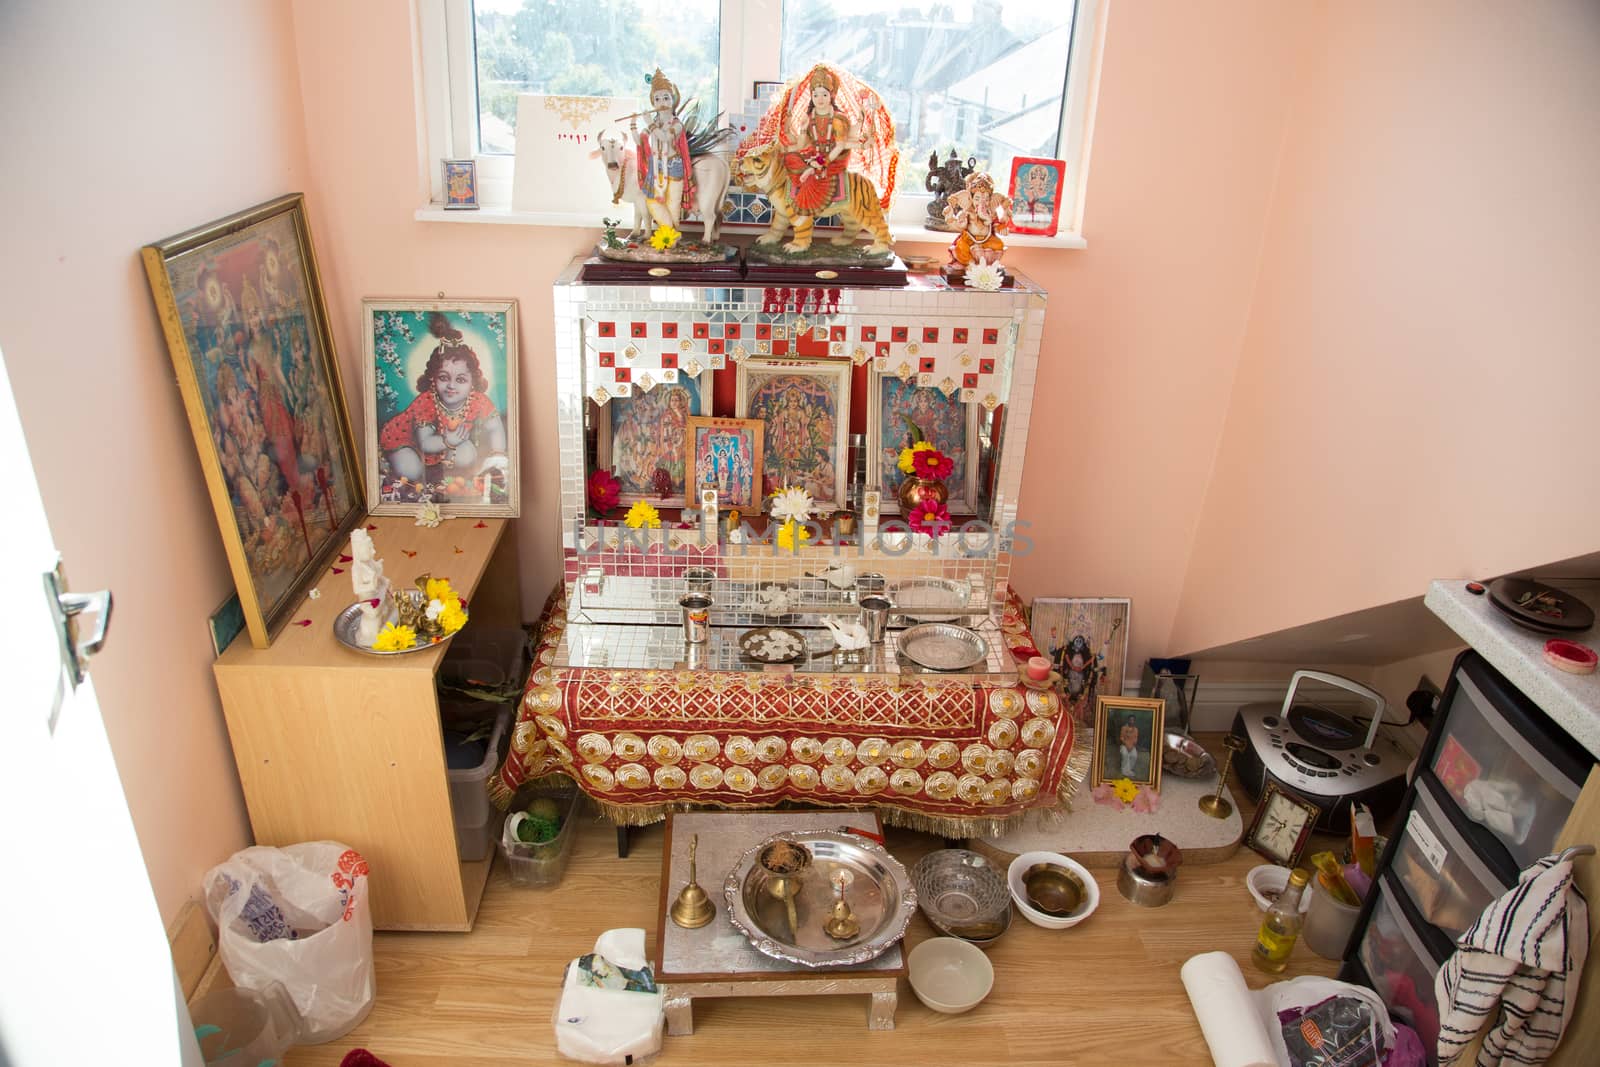 Religious items in the corner of an Indian household by camerarules